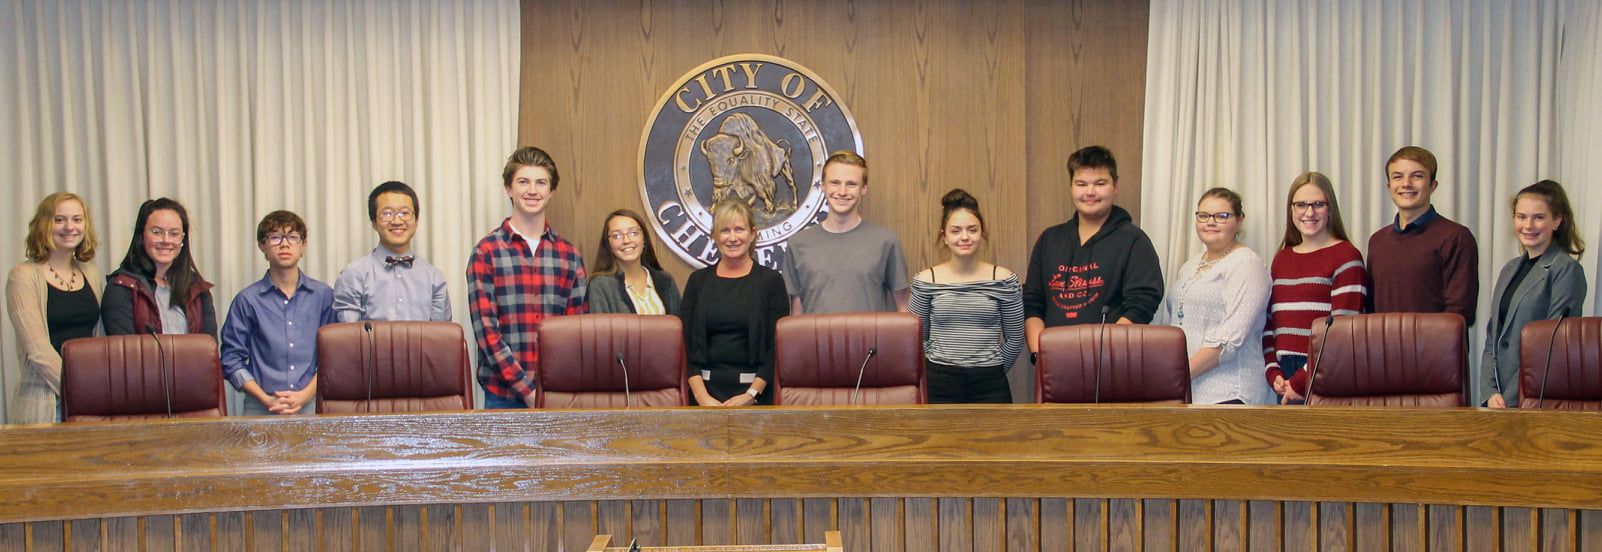 Building Tomorrow's Leaders, 2020 Mayor's Youth Council Sworn In